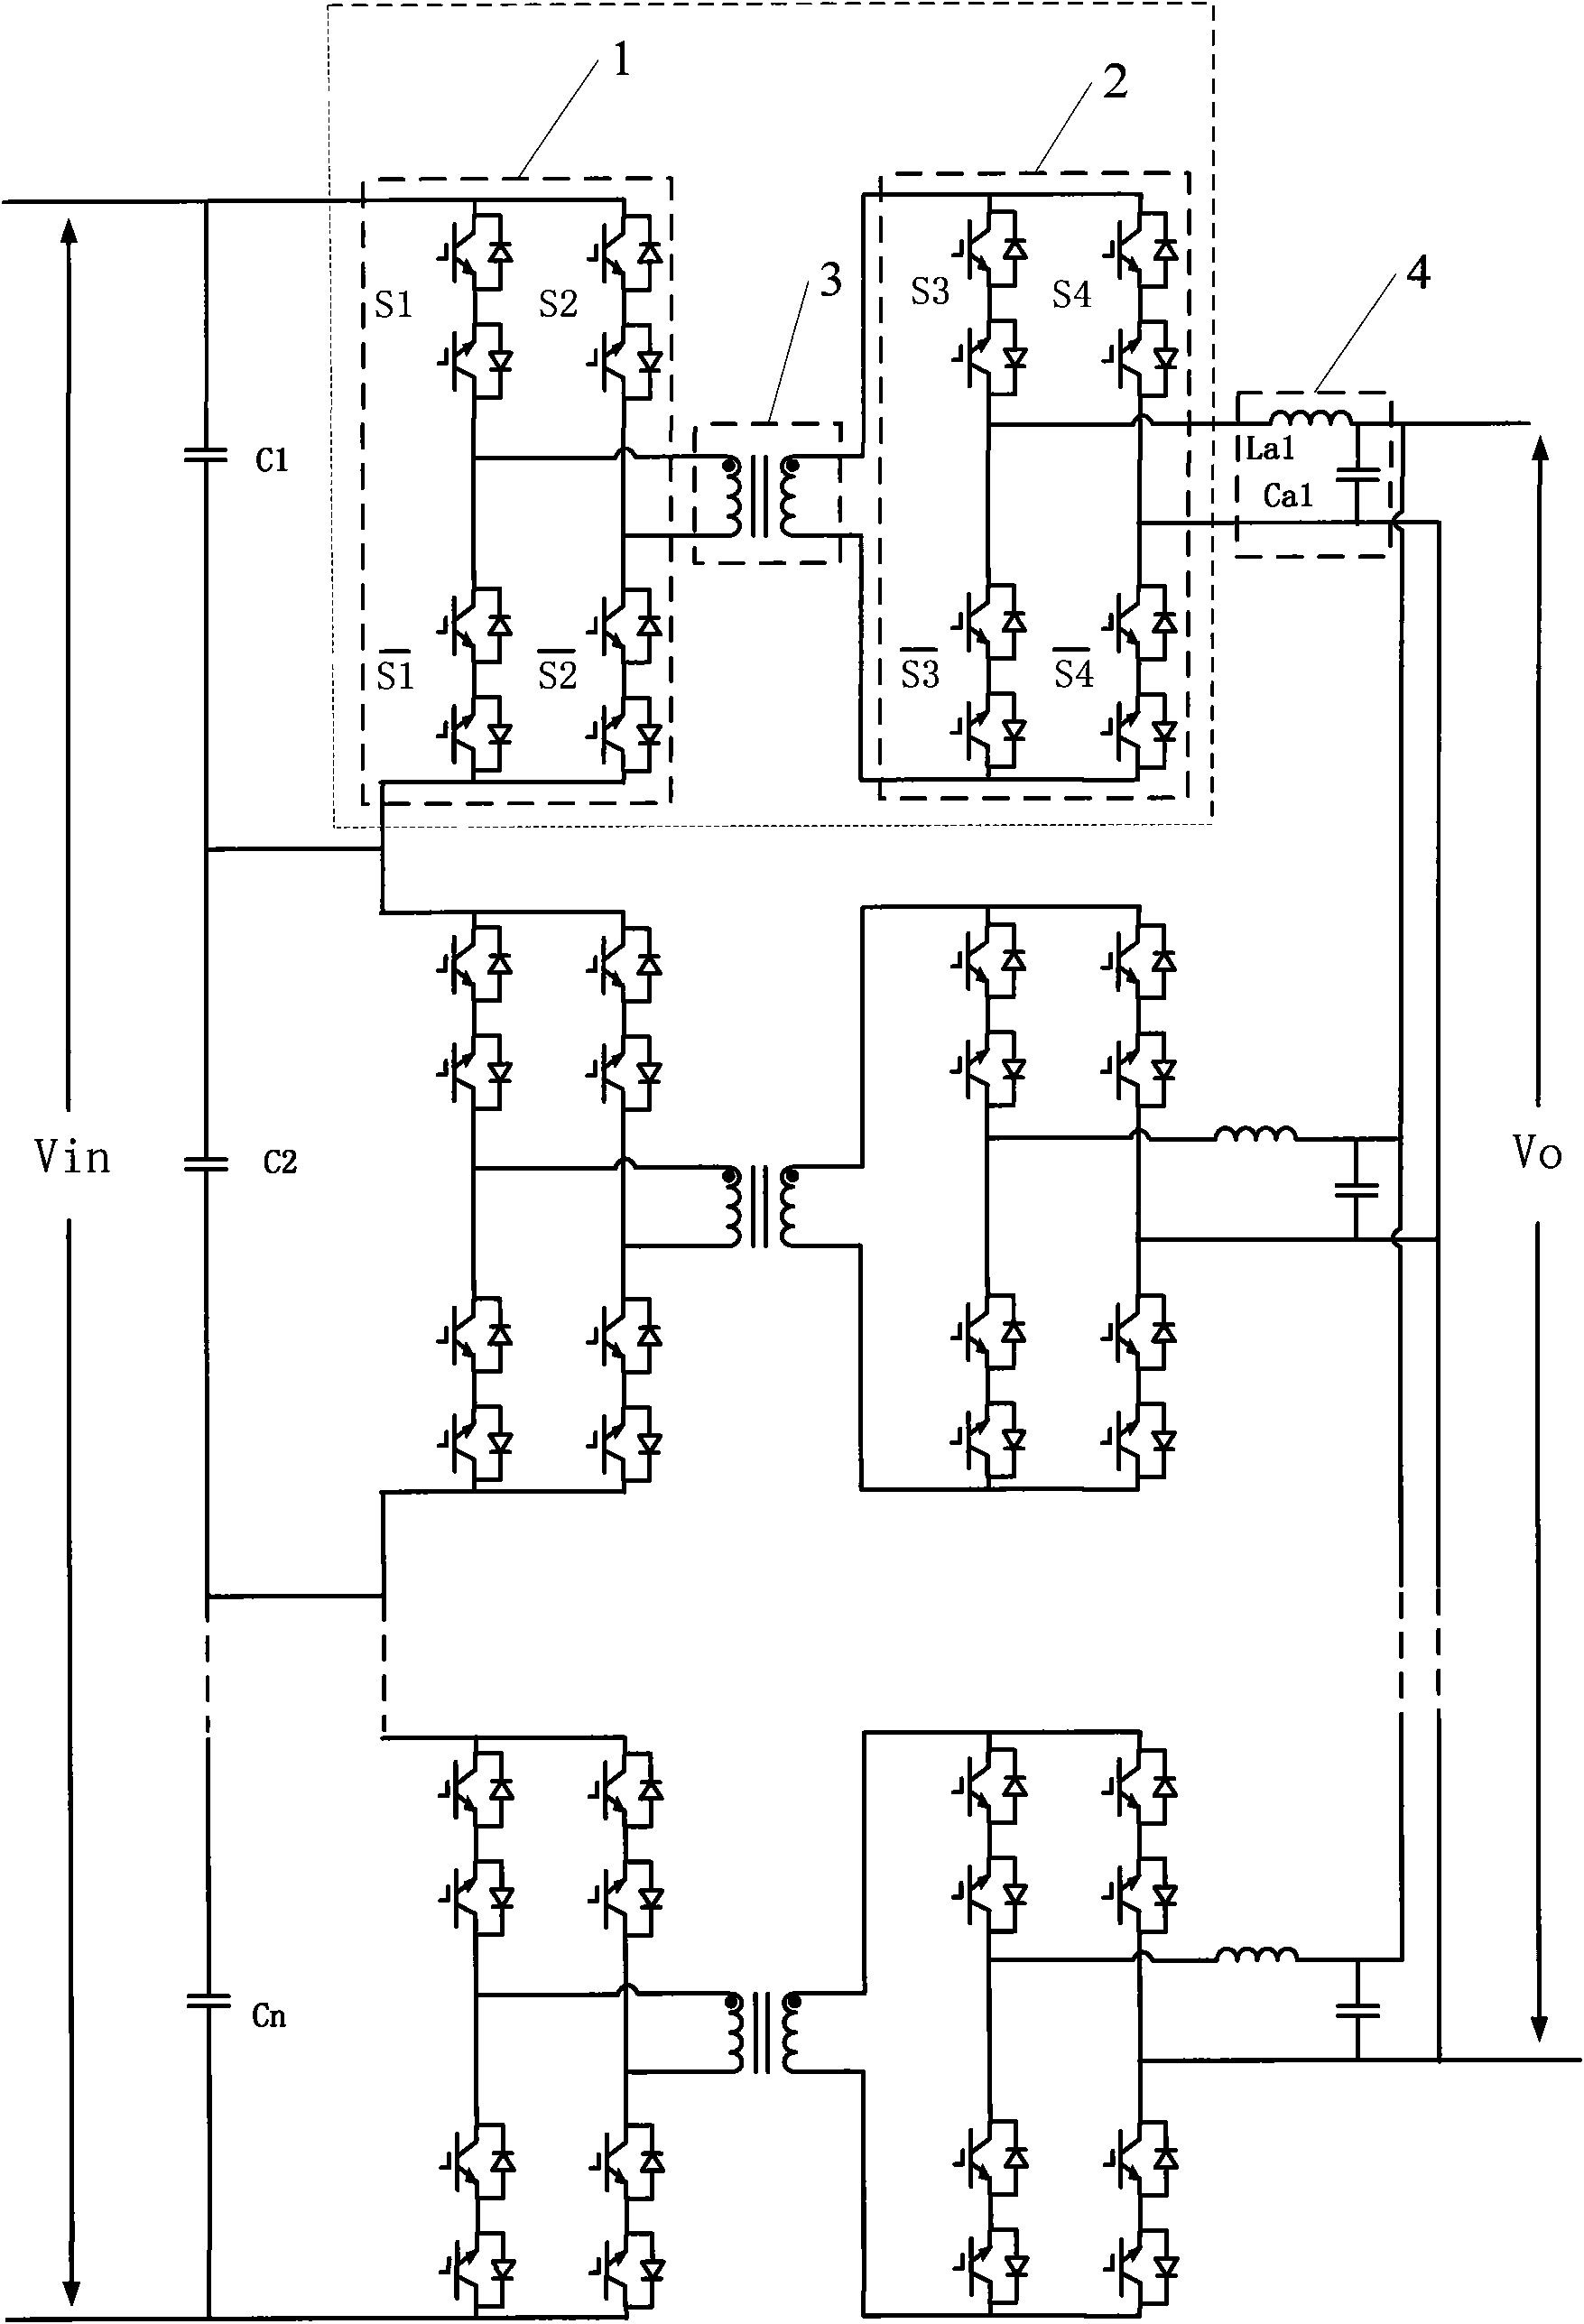 Power electronic transformer applied to distribution network